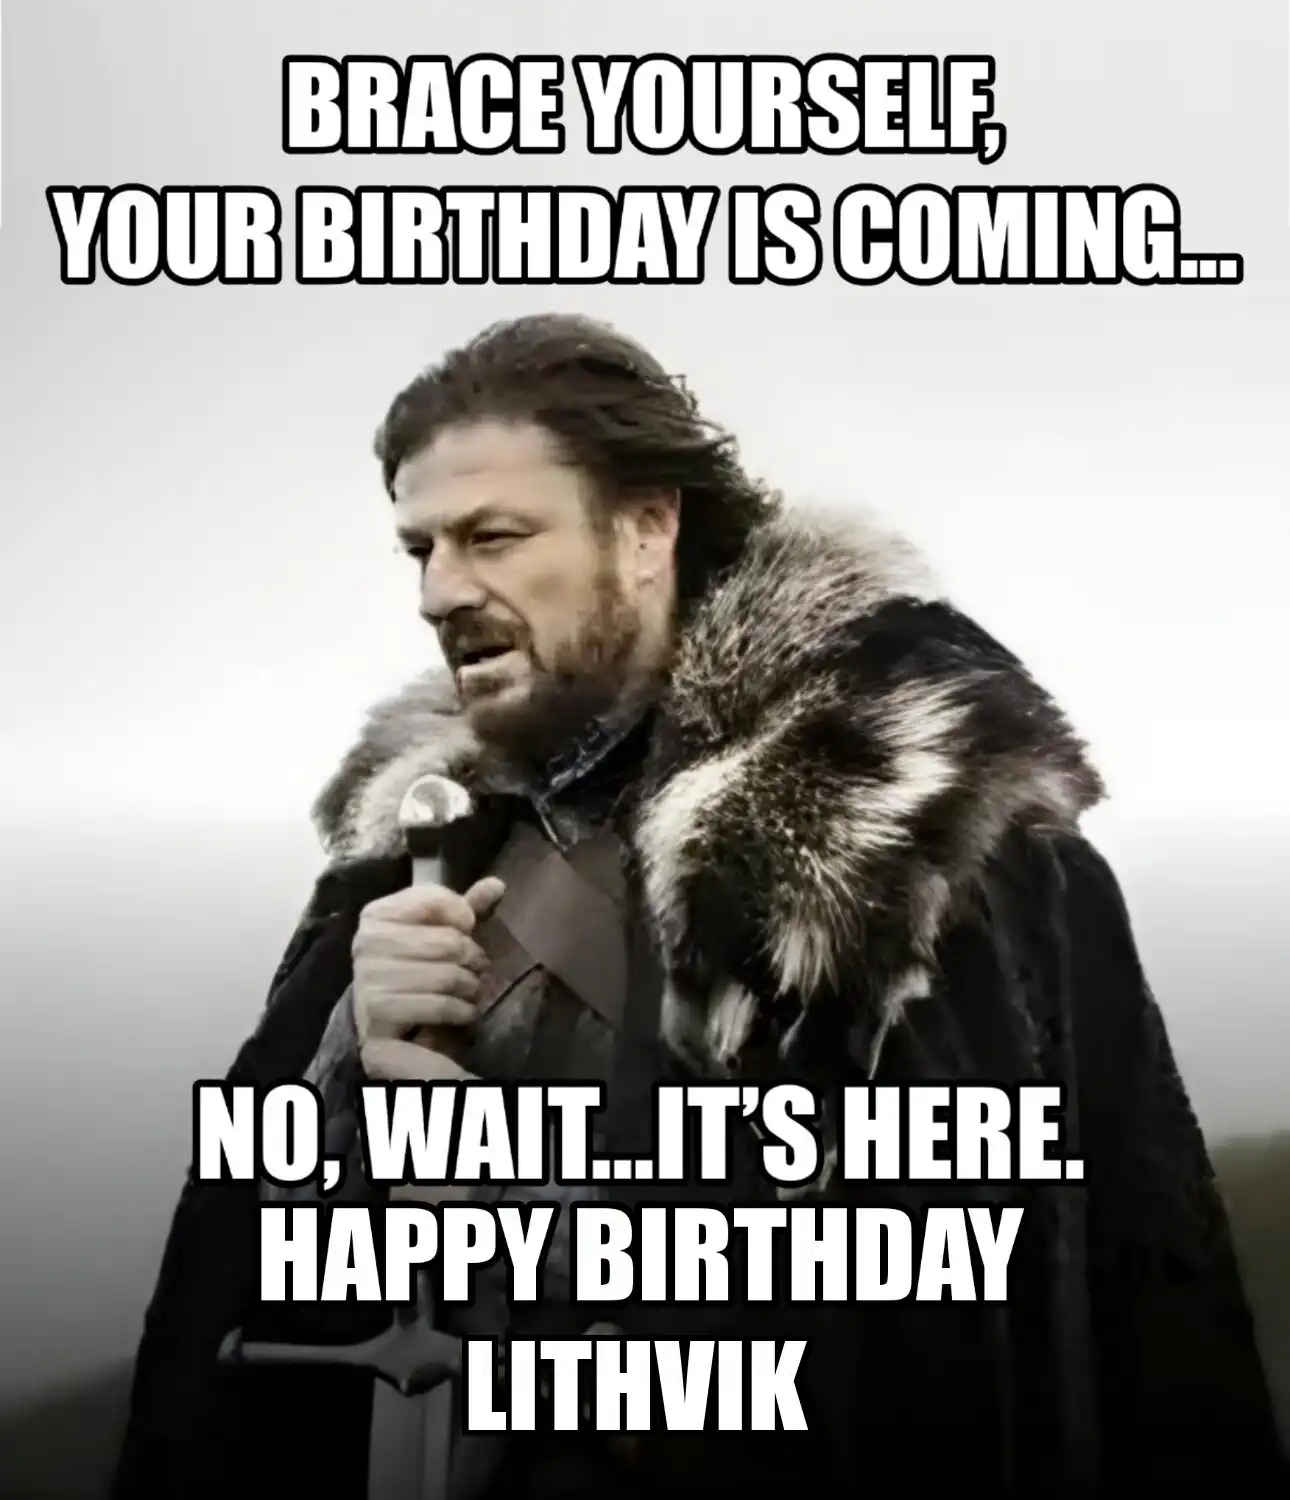 Happy Birthday Lithvik Brace Yourself Your Birthday Is Coming Meme